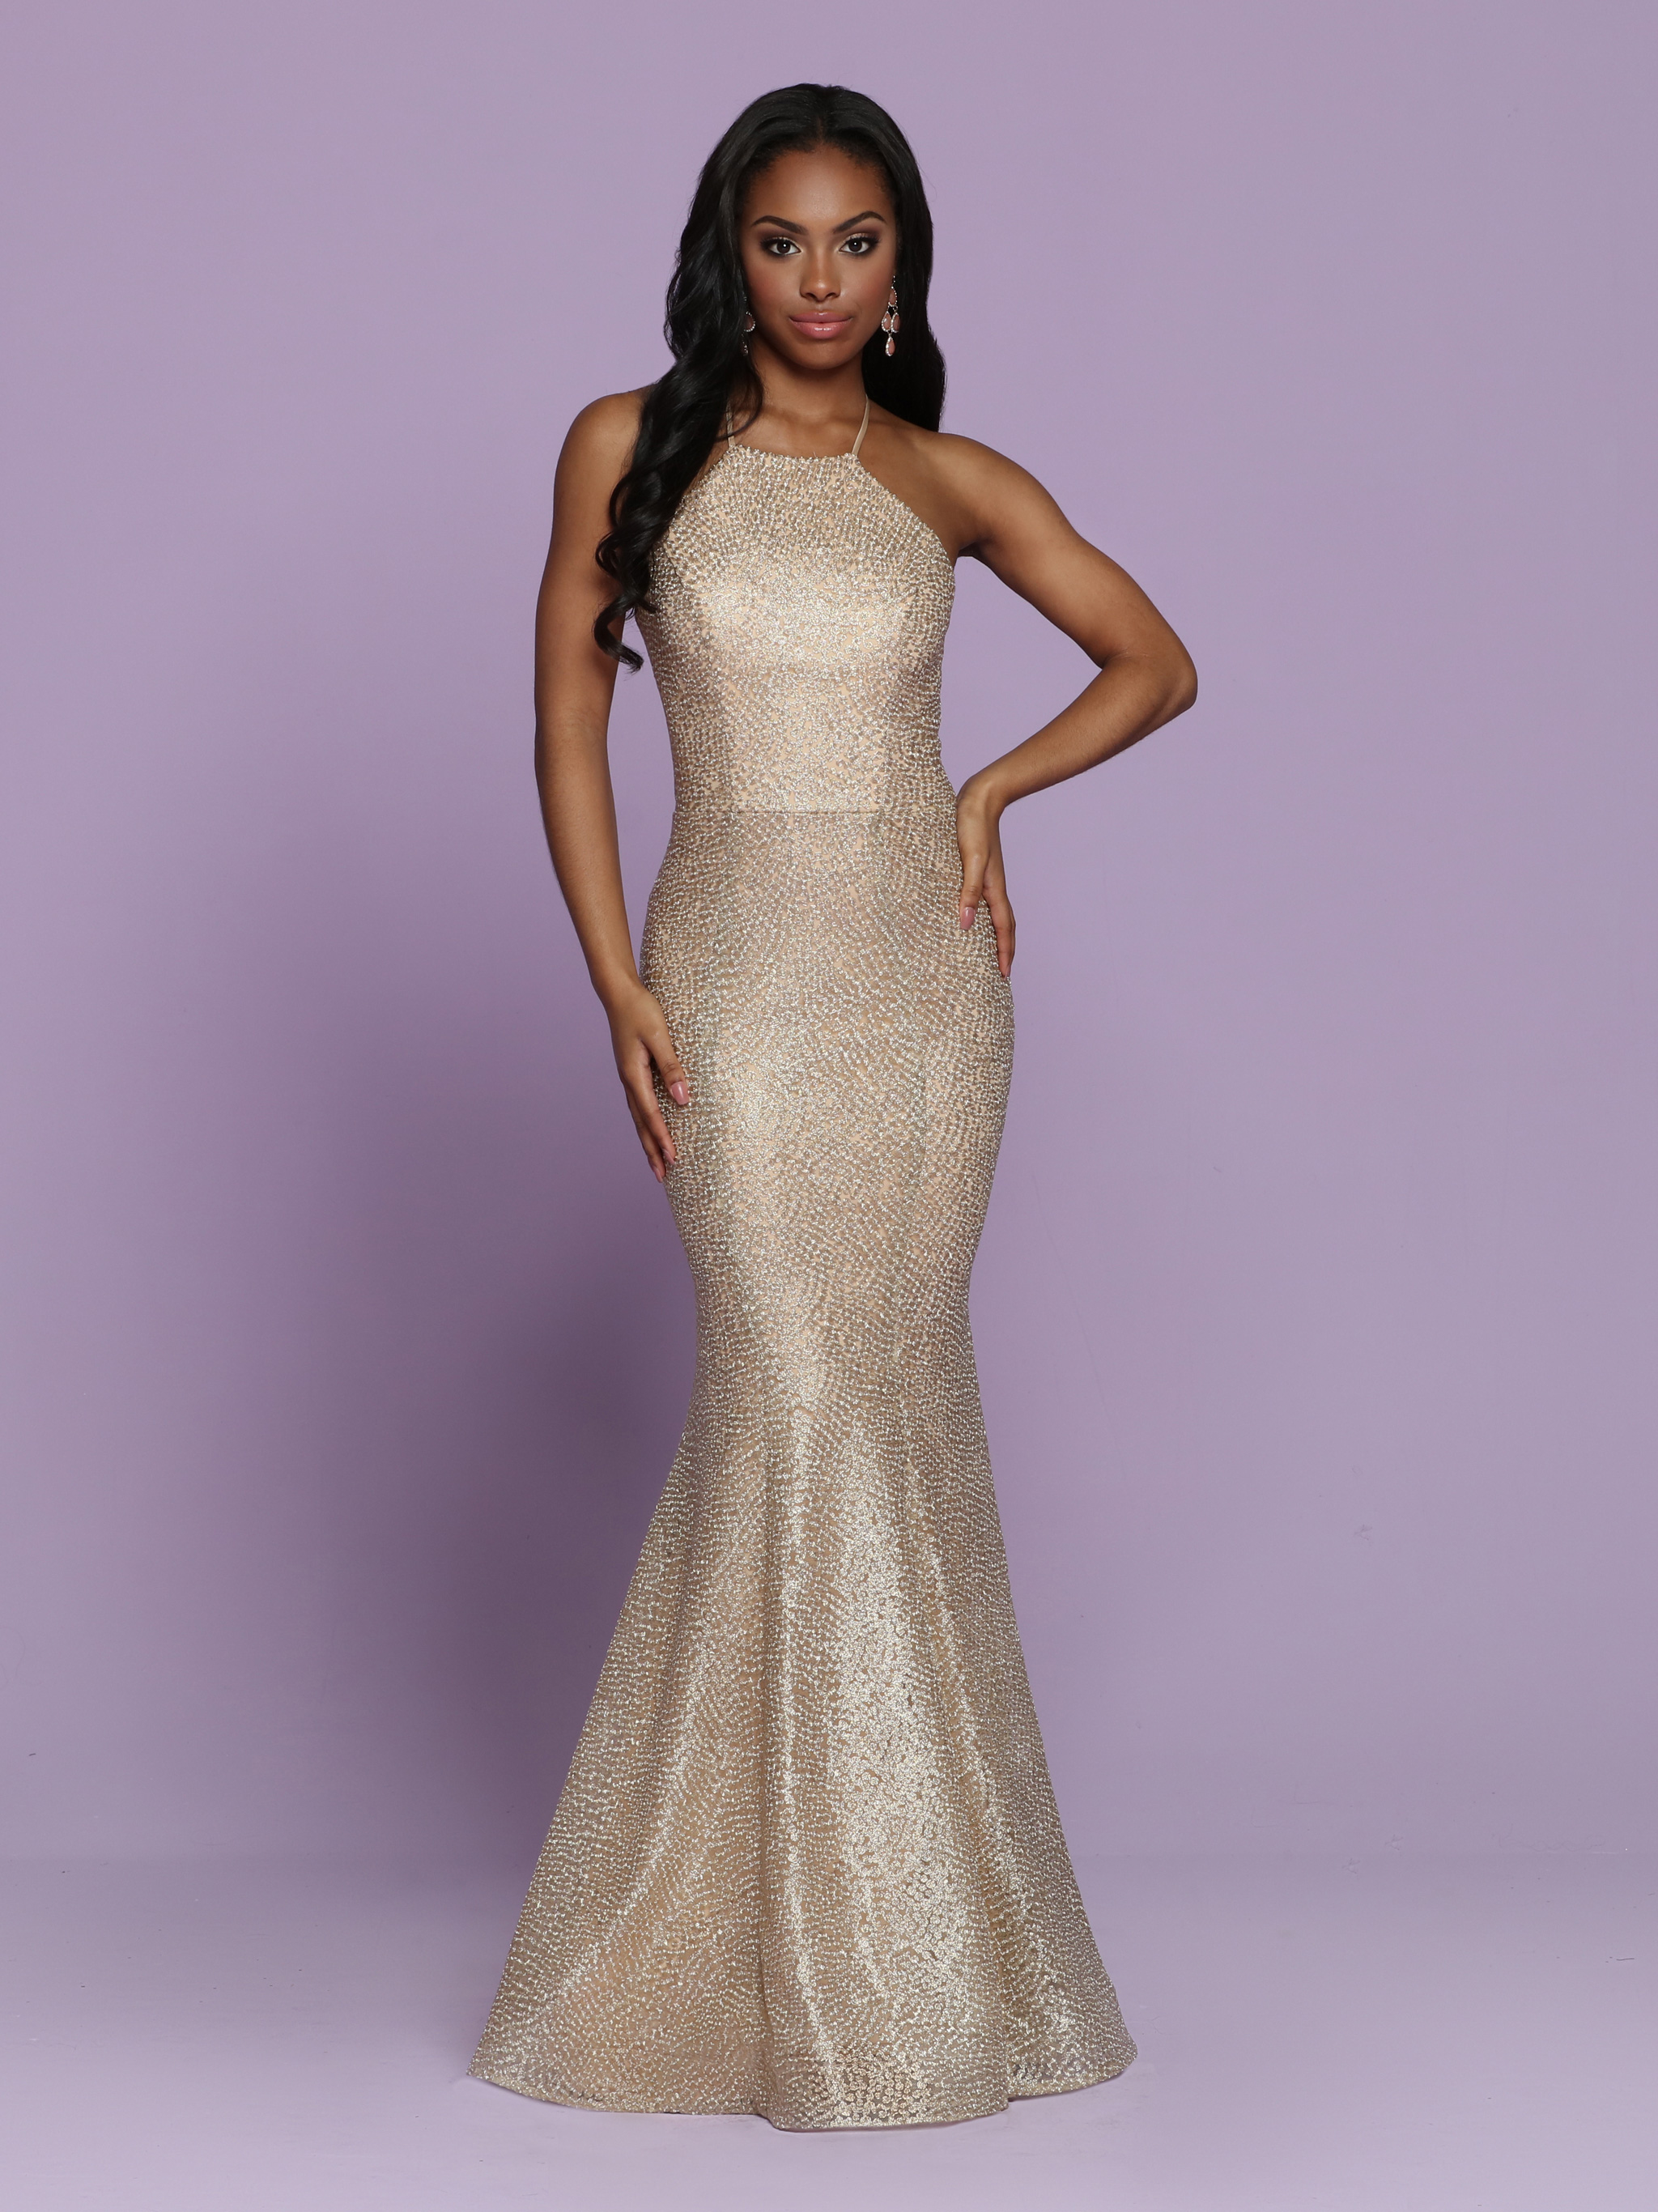 2020 Prom Dress Trends Gold Gowns – Sparkle Prom